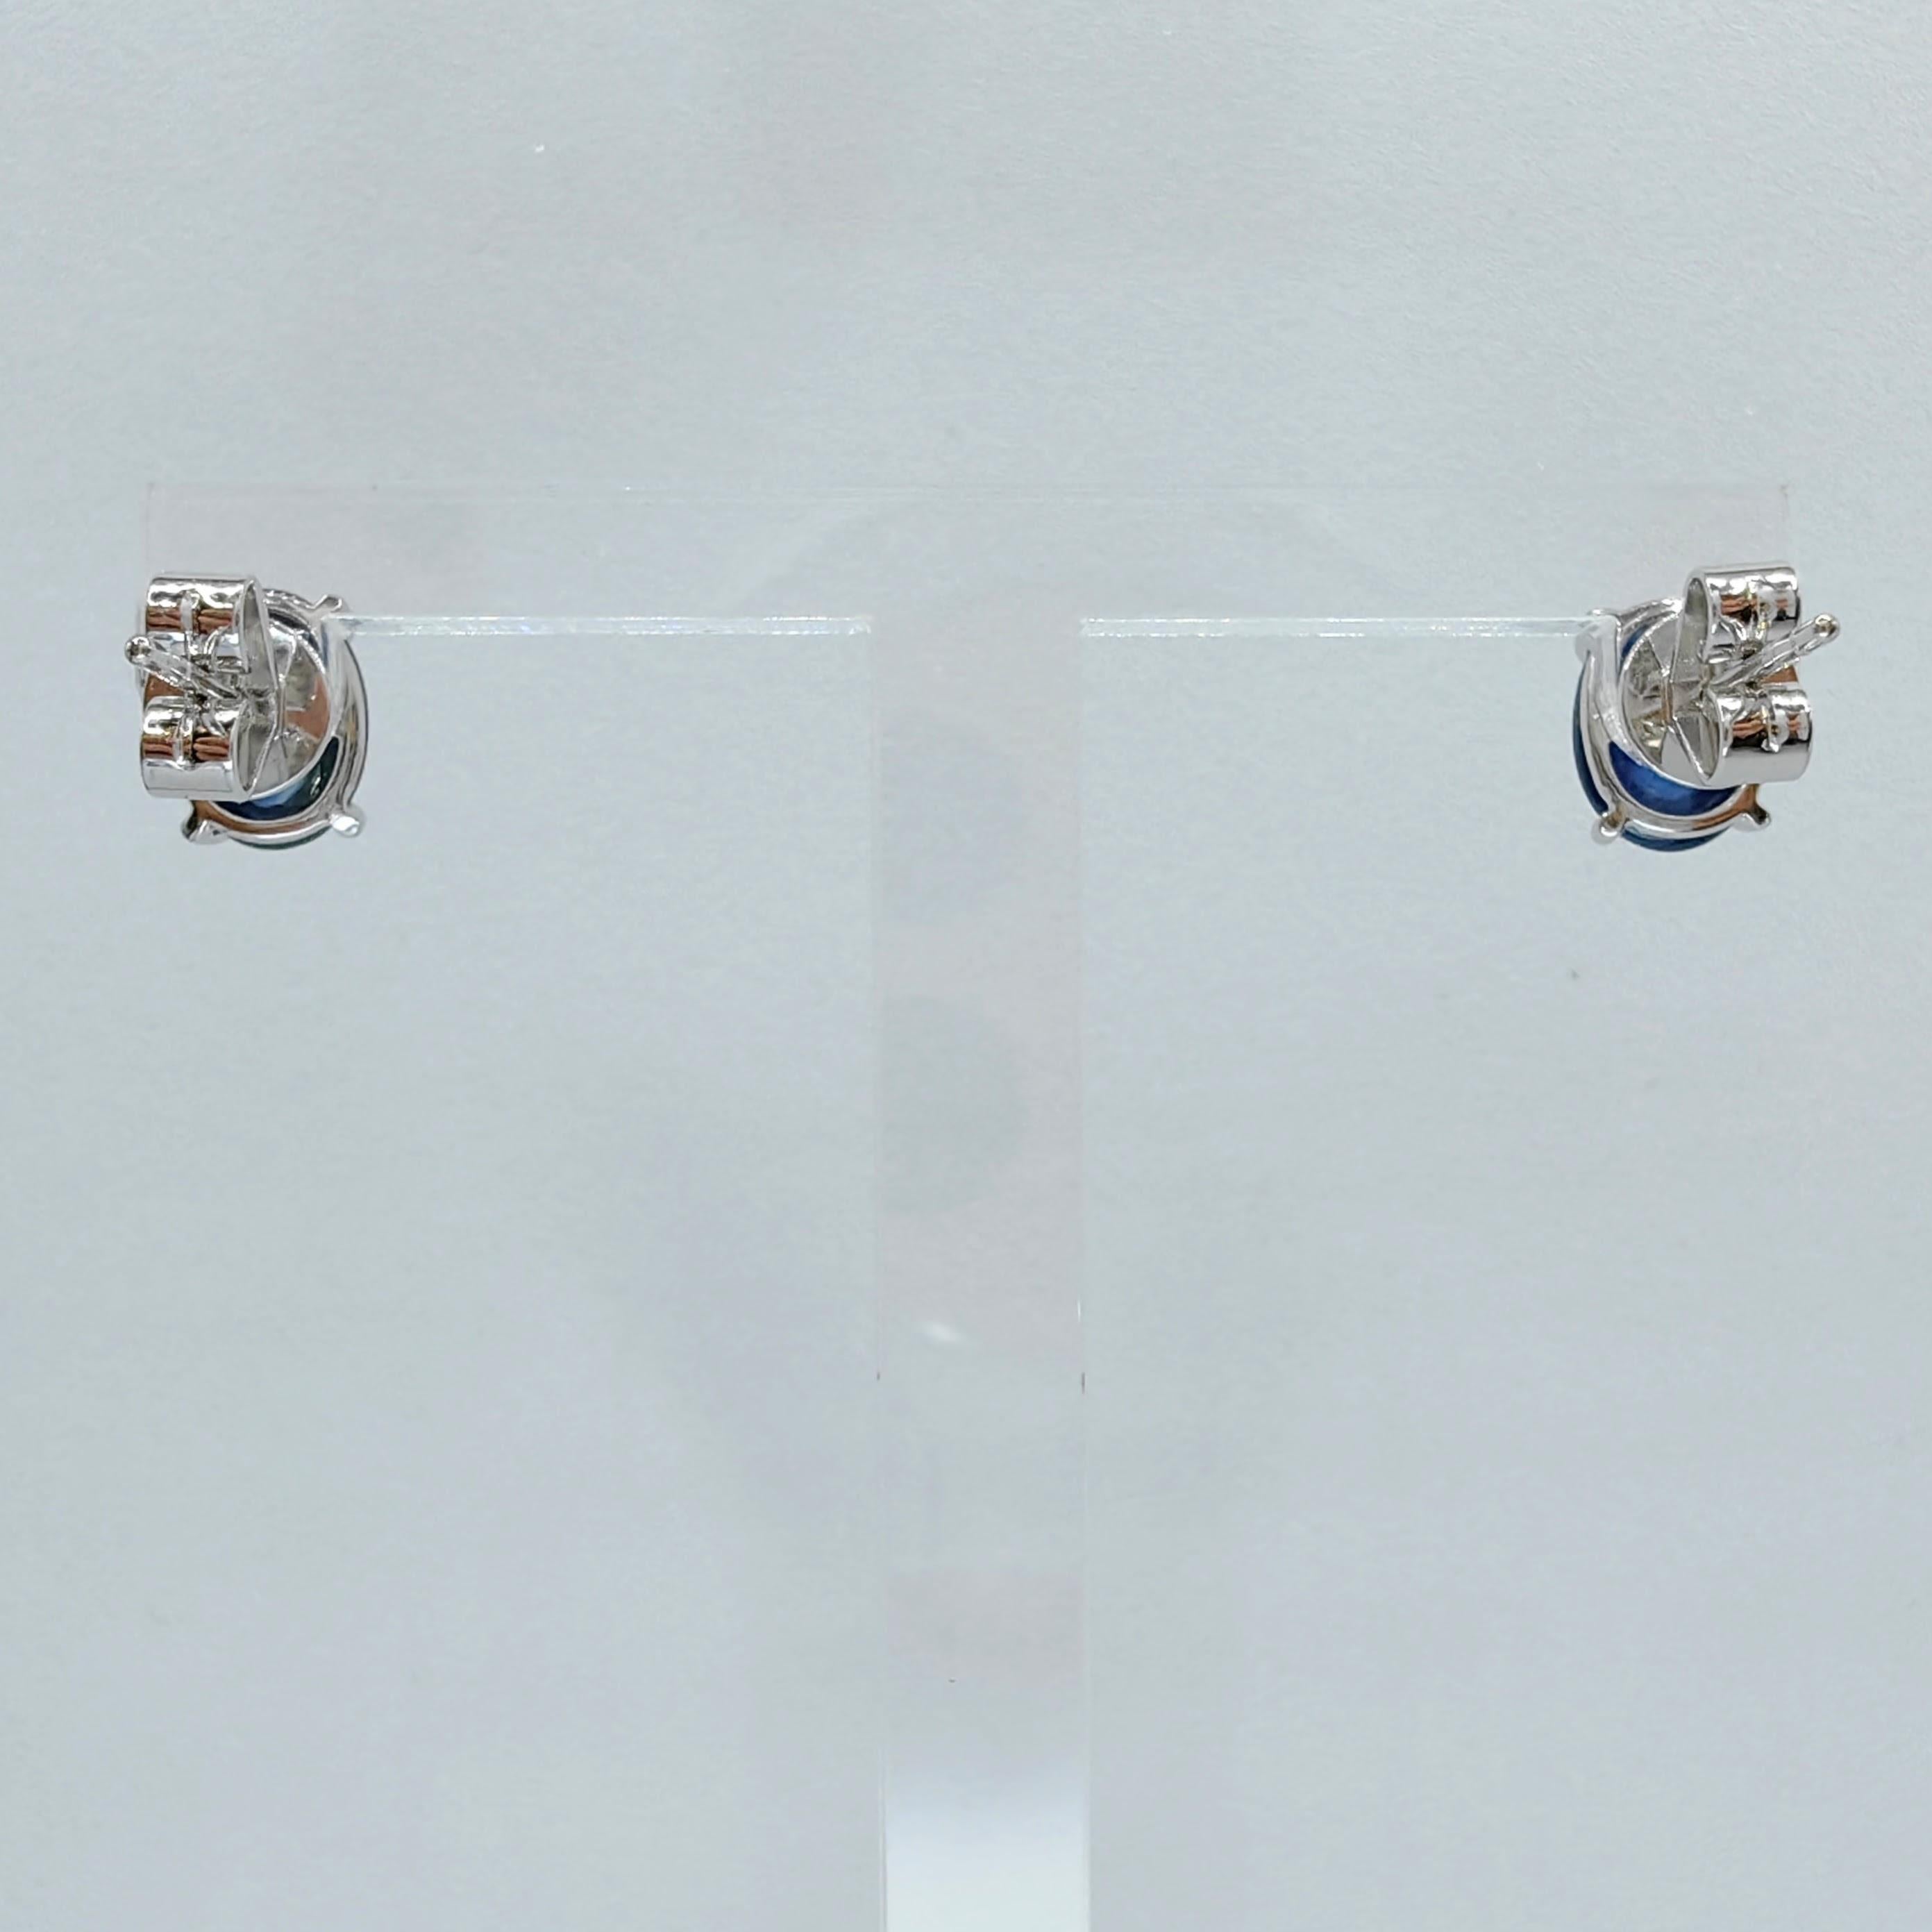 Matched 2.95 Carat 8x6mm Cabochon Blue Sapphire Stud Earrings in 18K White Gold For Sale 2